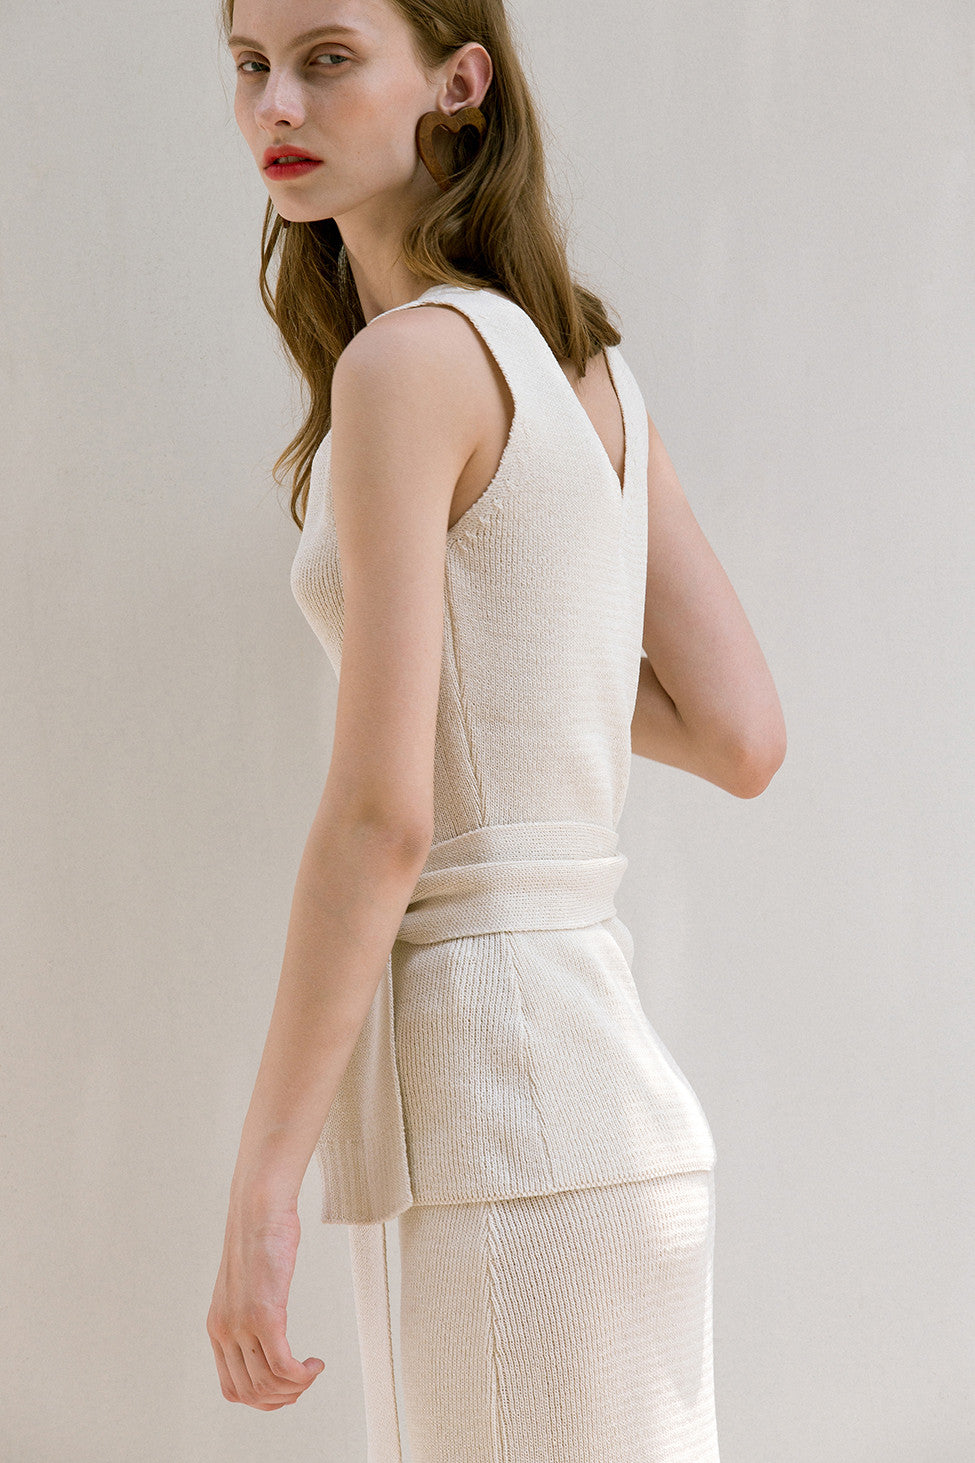 The Mikaela Top in lightweight knitted with V-neckline. Sleeveless. Detachable sash belt. Pull on.